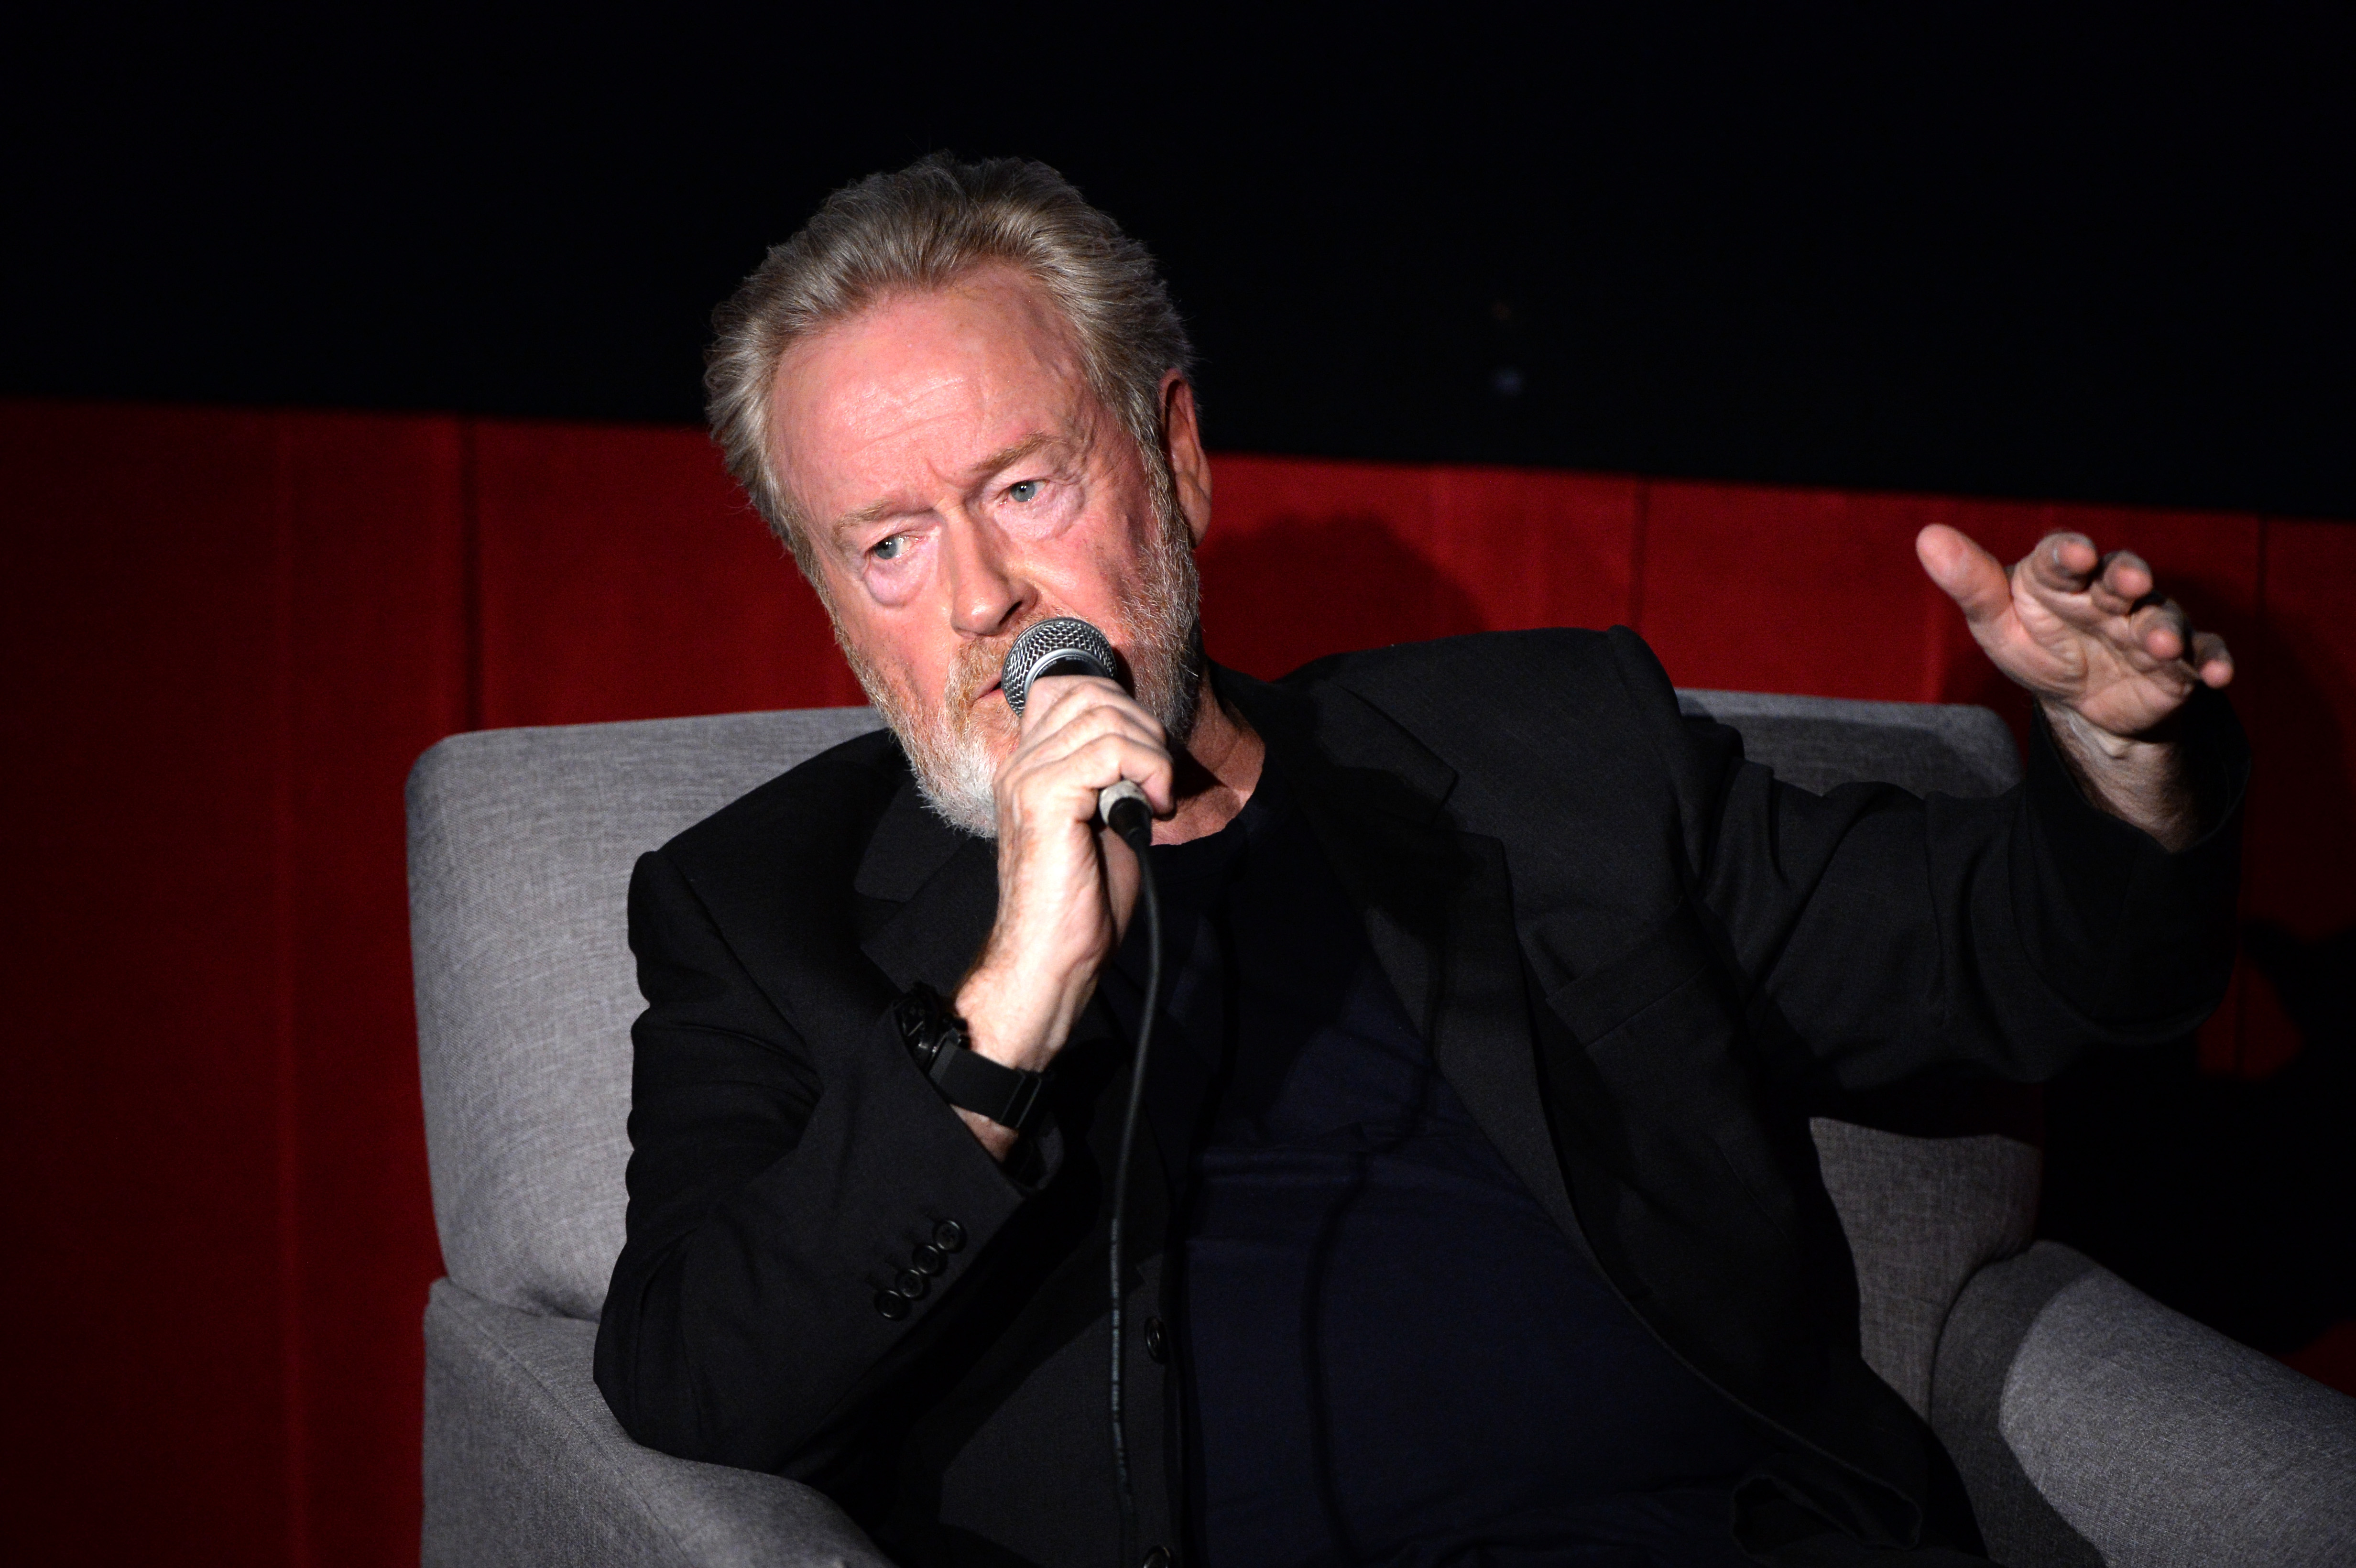 Ridley Scott speaks into a microphone while wearing a black jacket and sitting in a gray chair.